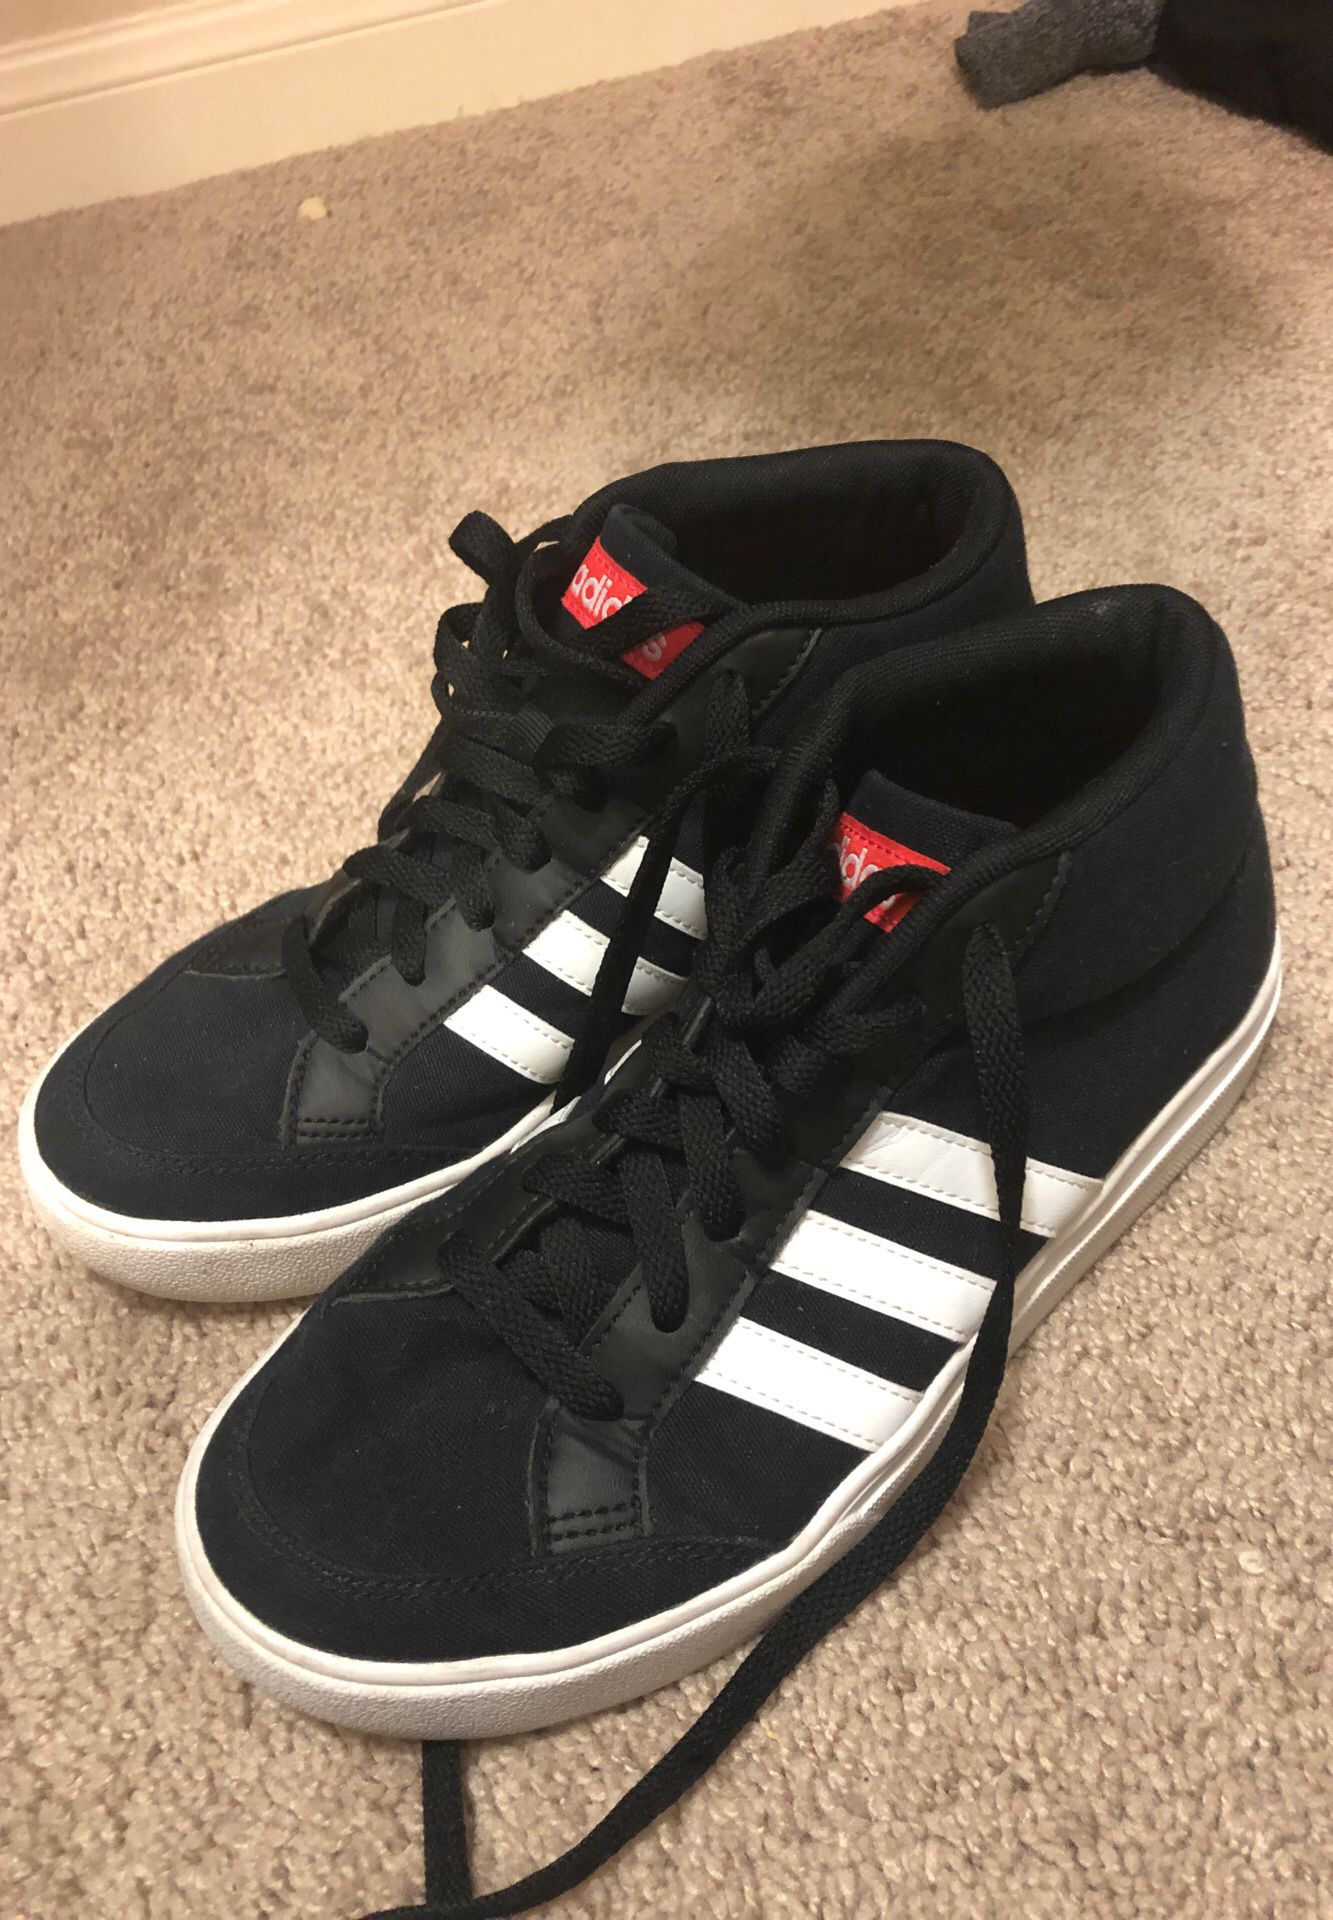 Women’s size 6 adidas shoes